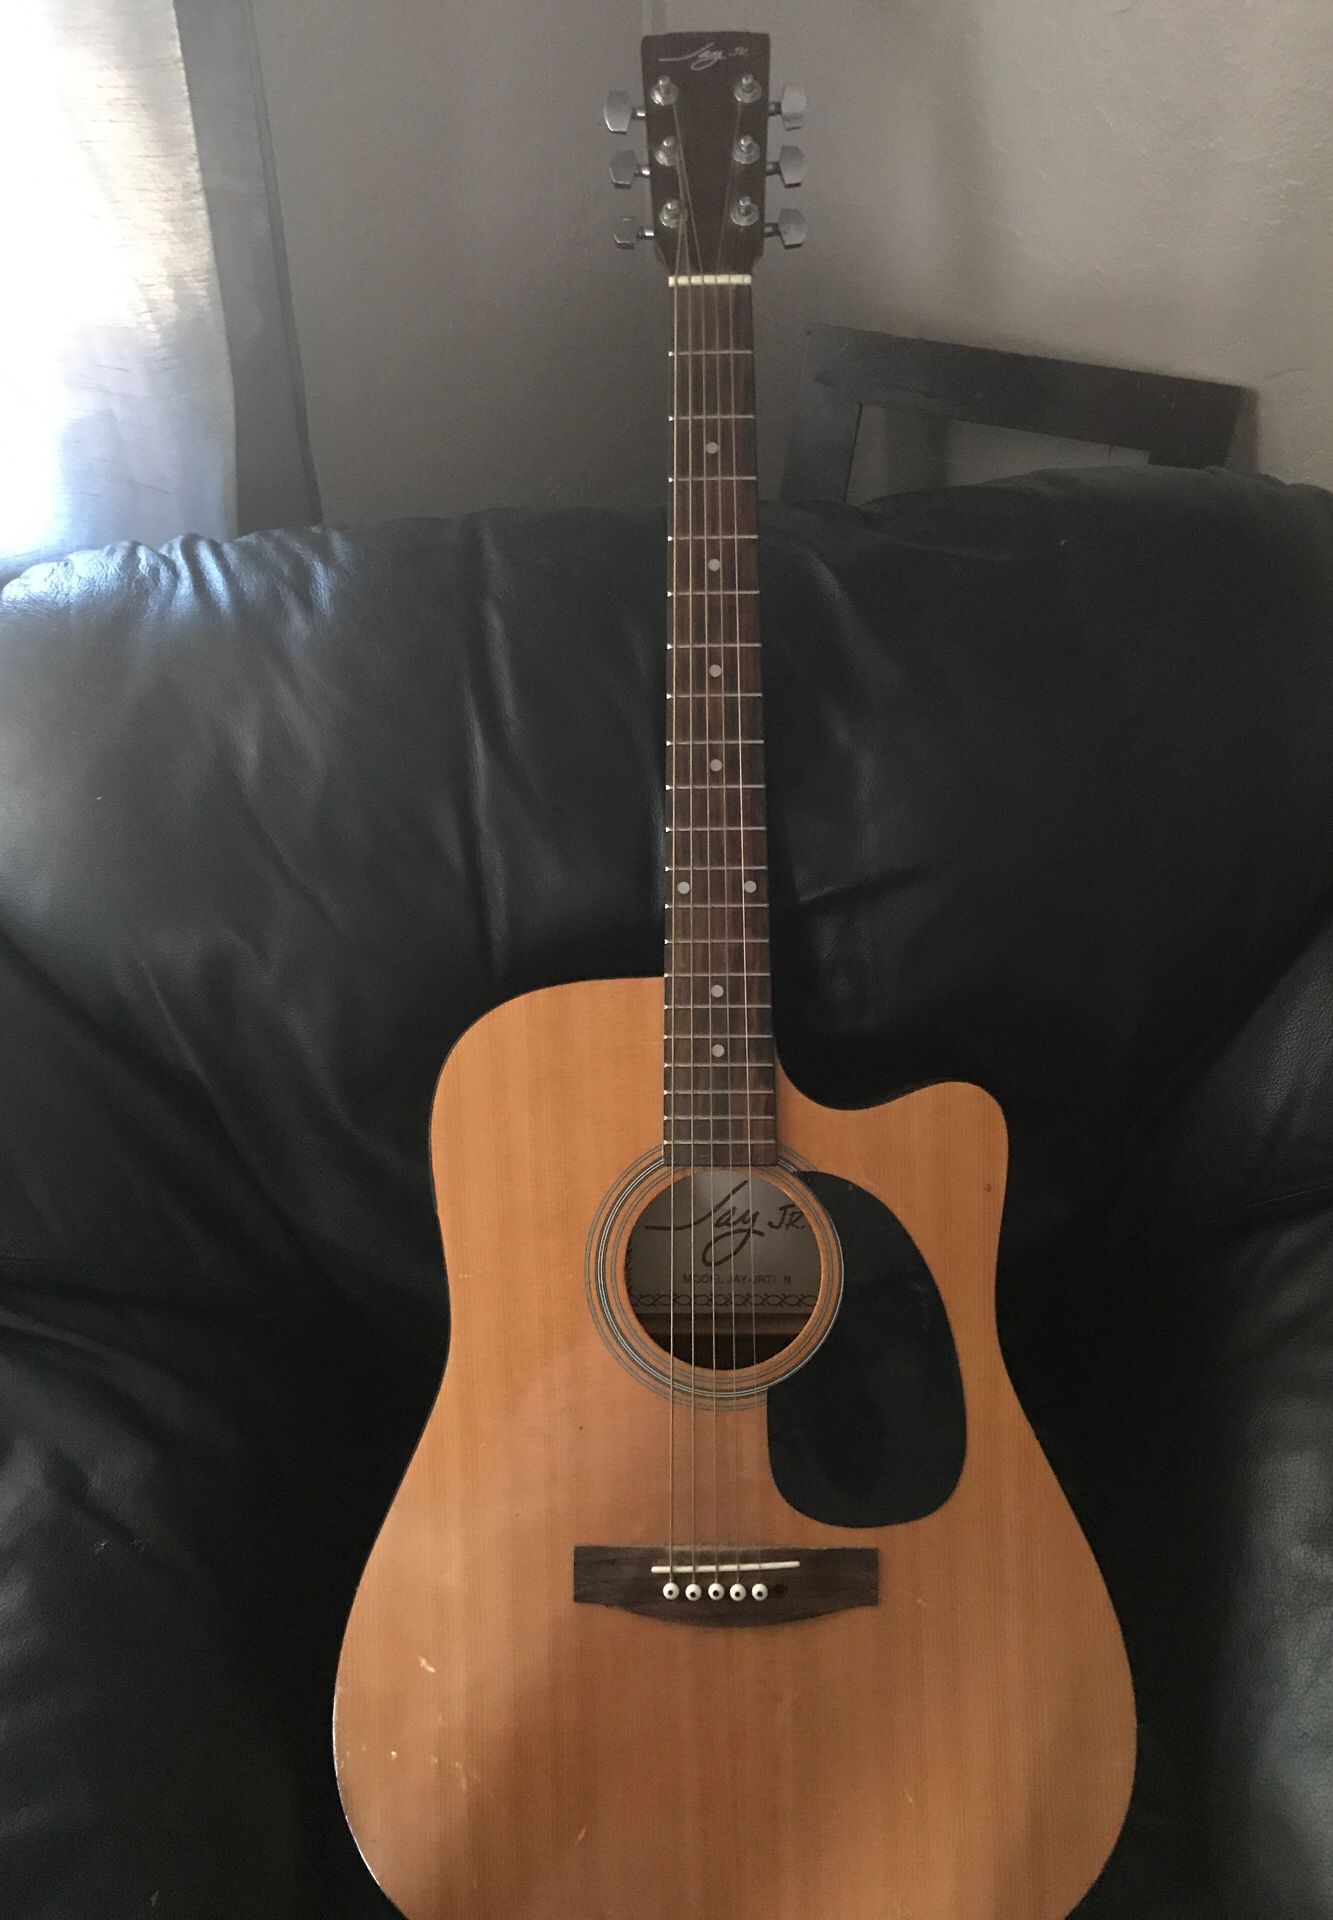 Acoustic JAY JR guitar has stand and original case